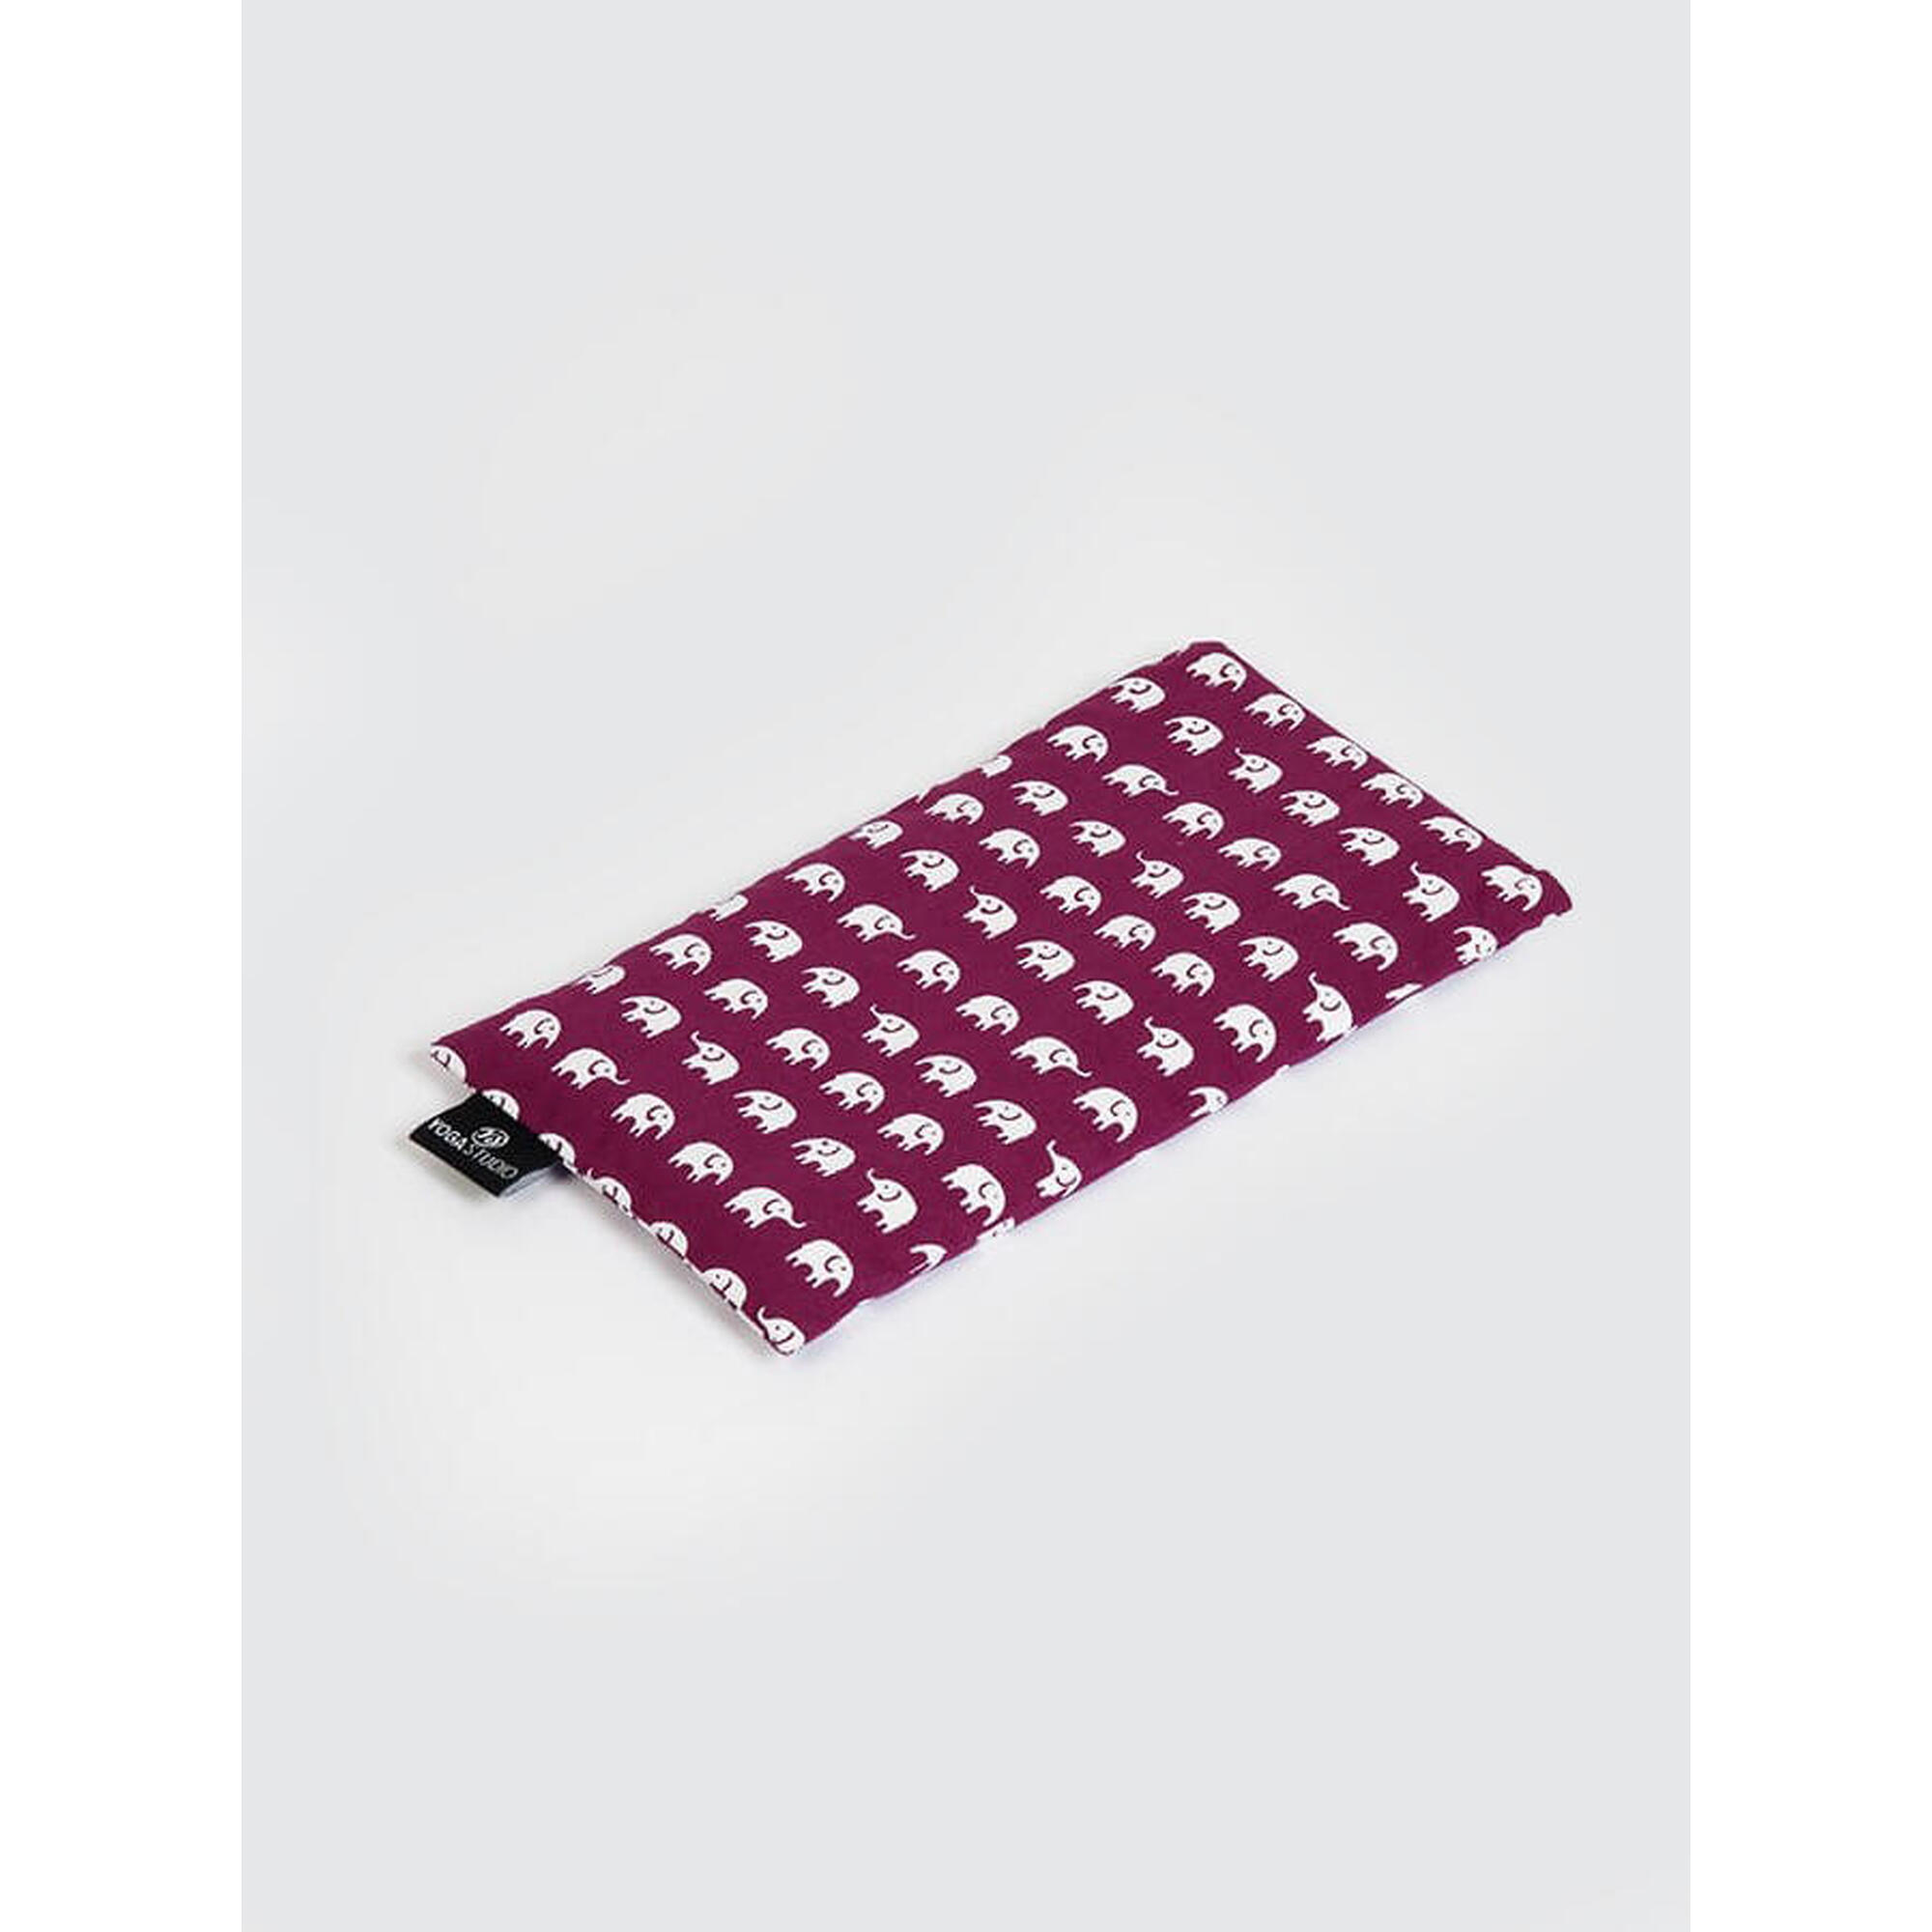 Yoga Studio Scented Lavender & Linseed Eye Pillows - Violet Elephant 1/2